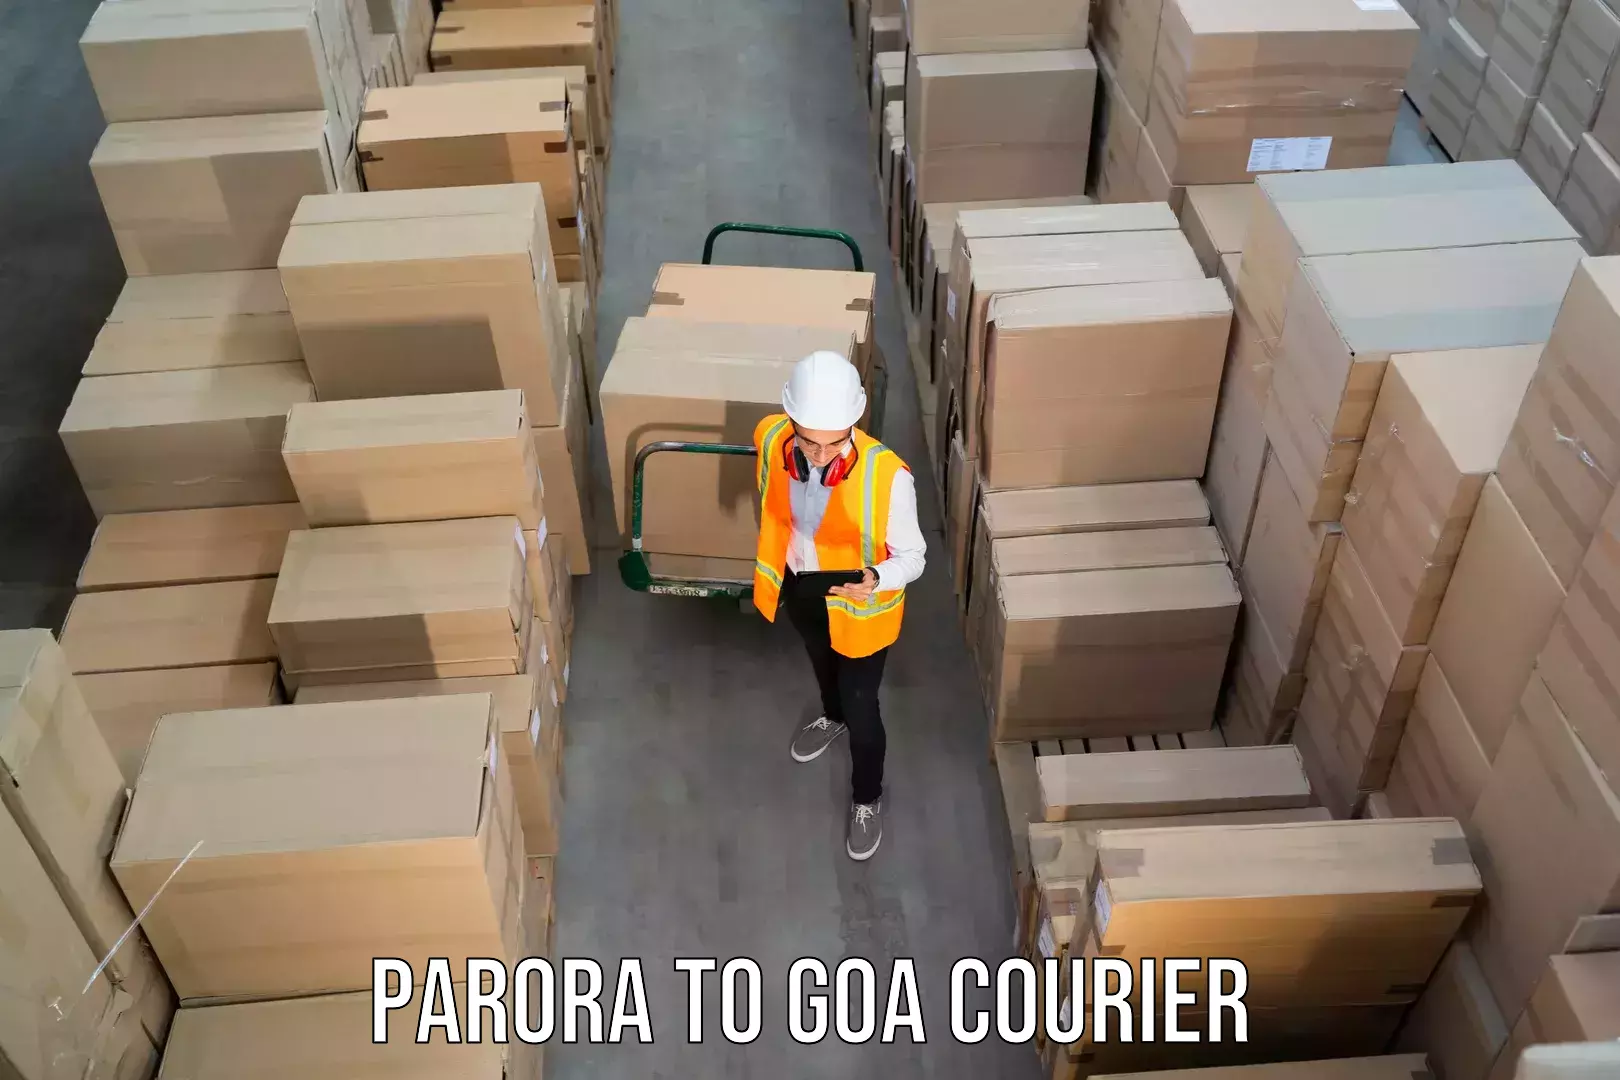 Express delivery capabilities Parora to South Goa